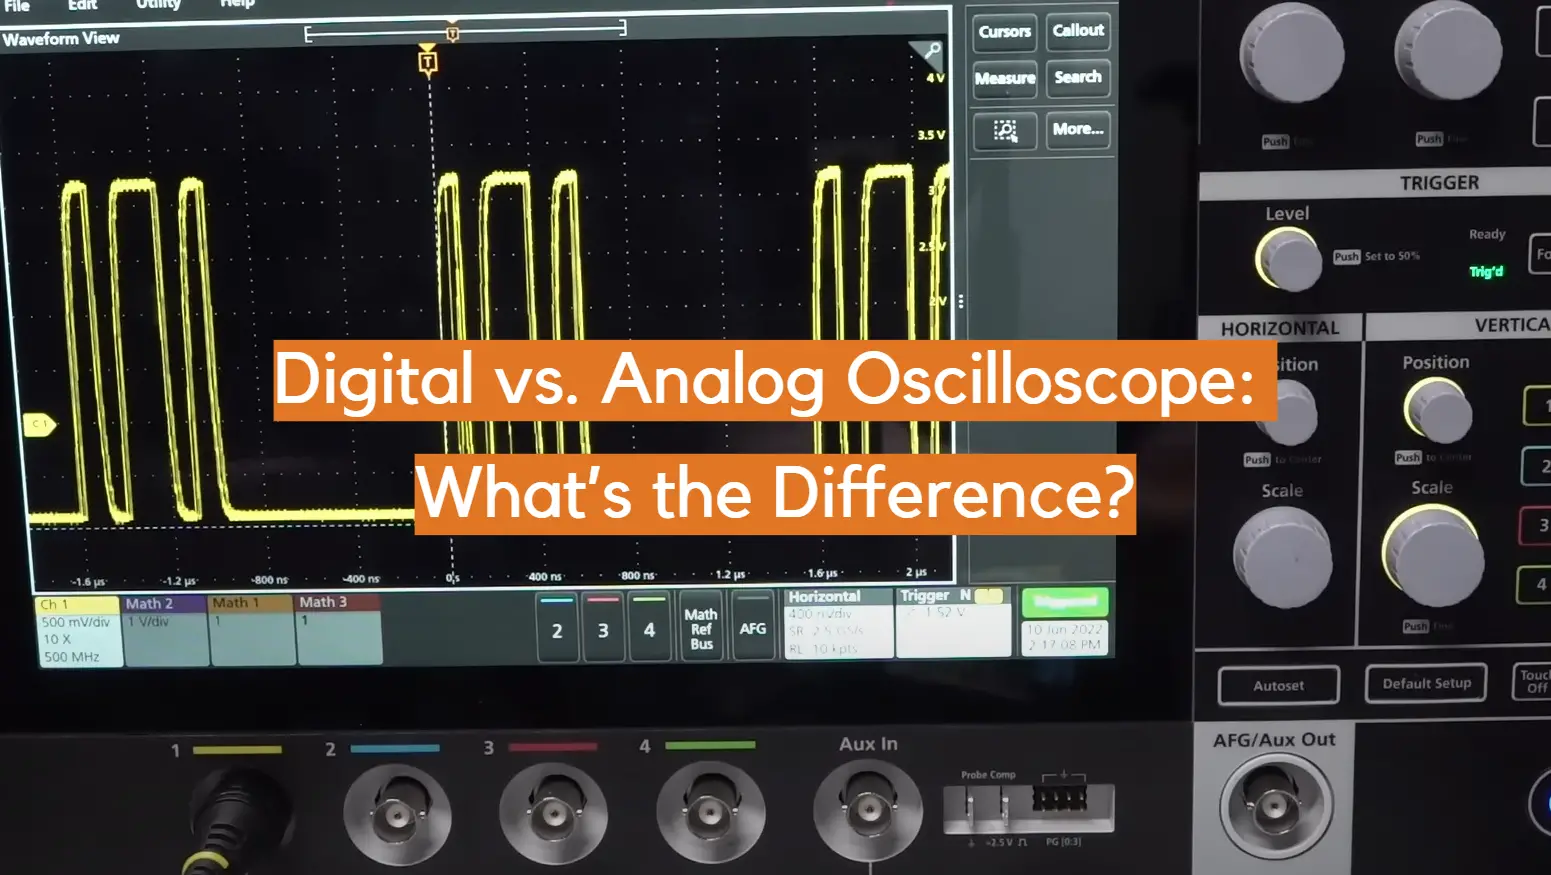 Digital vs. Analog Oscilloscope: What’s the Difference?